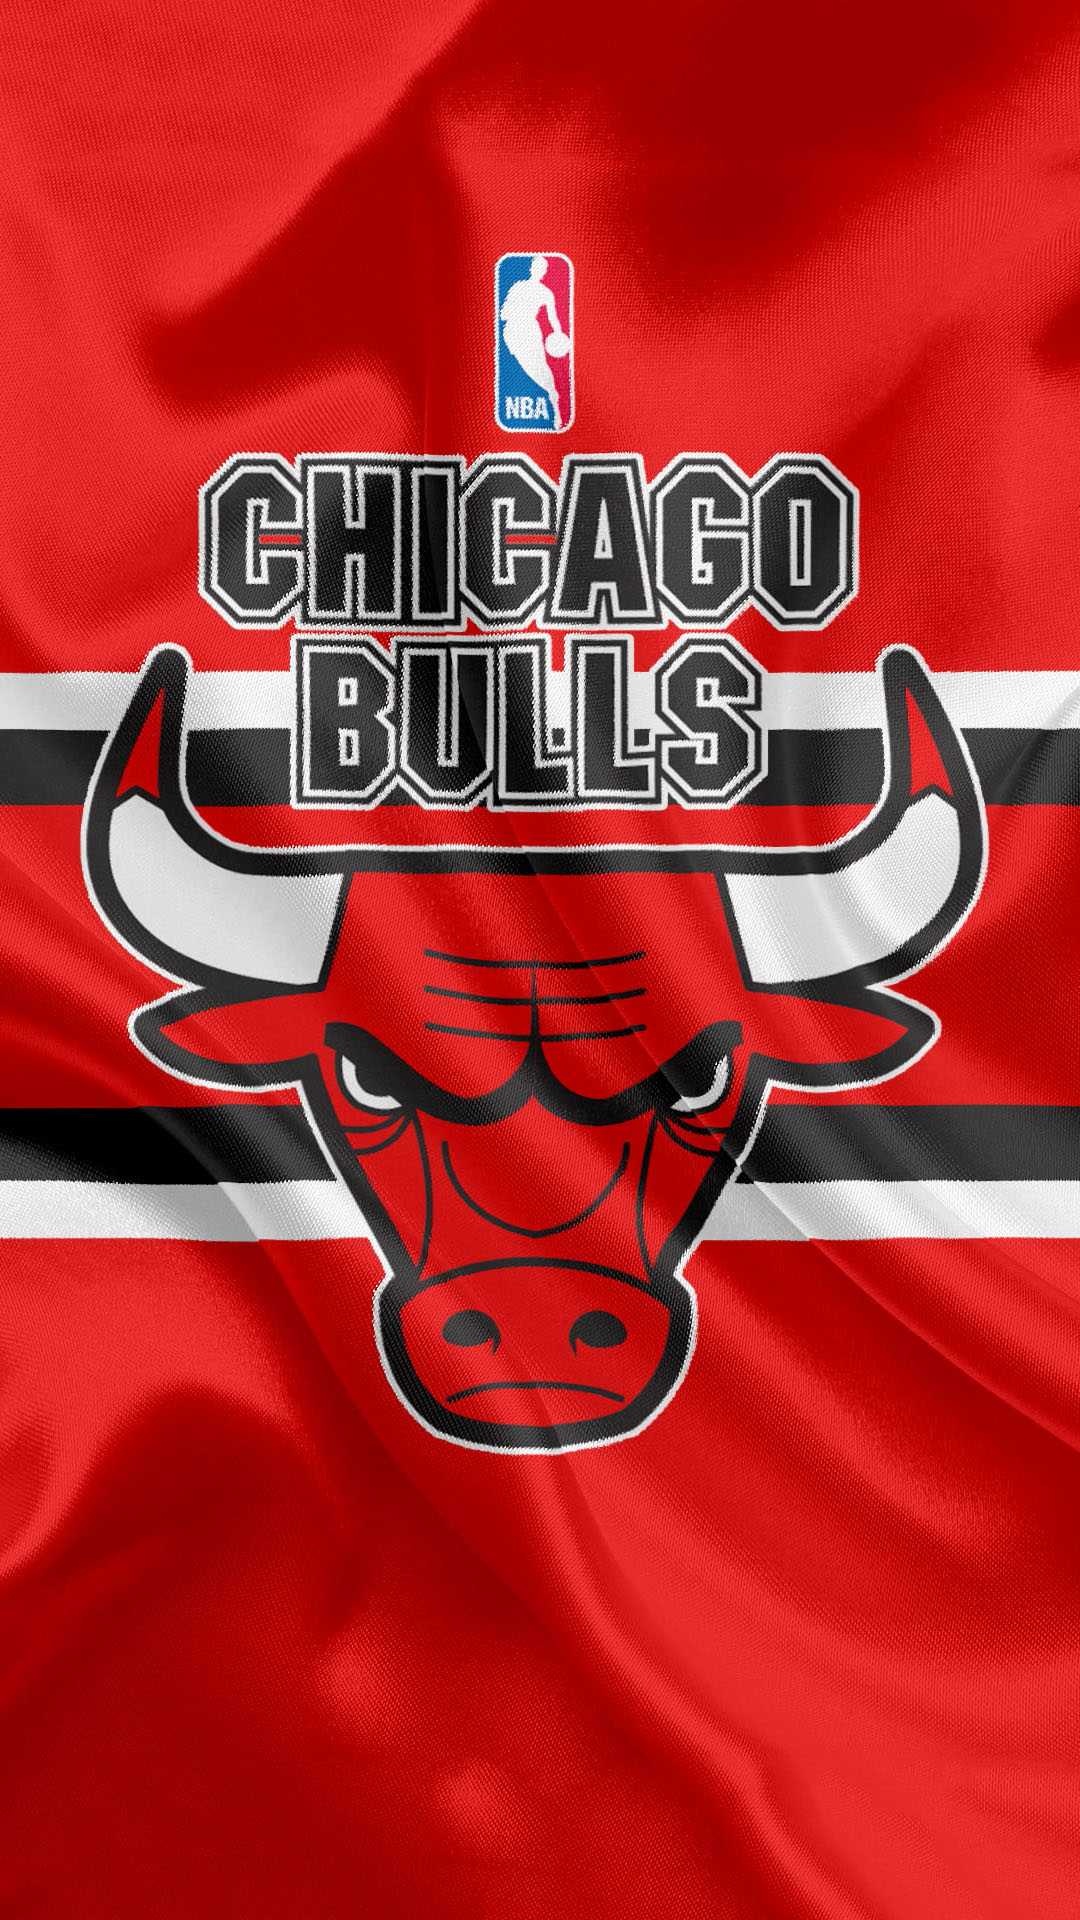 Chicago Bulls: The team were beaten by the New York Knicks in the second round of the 1994 playoffs. 1080x1920 Full HD Wallpaper.